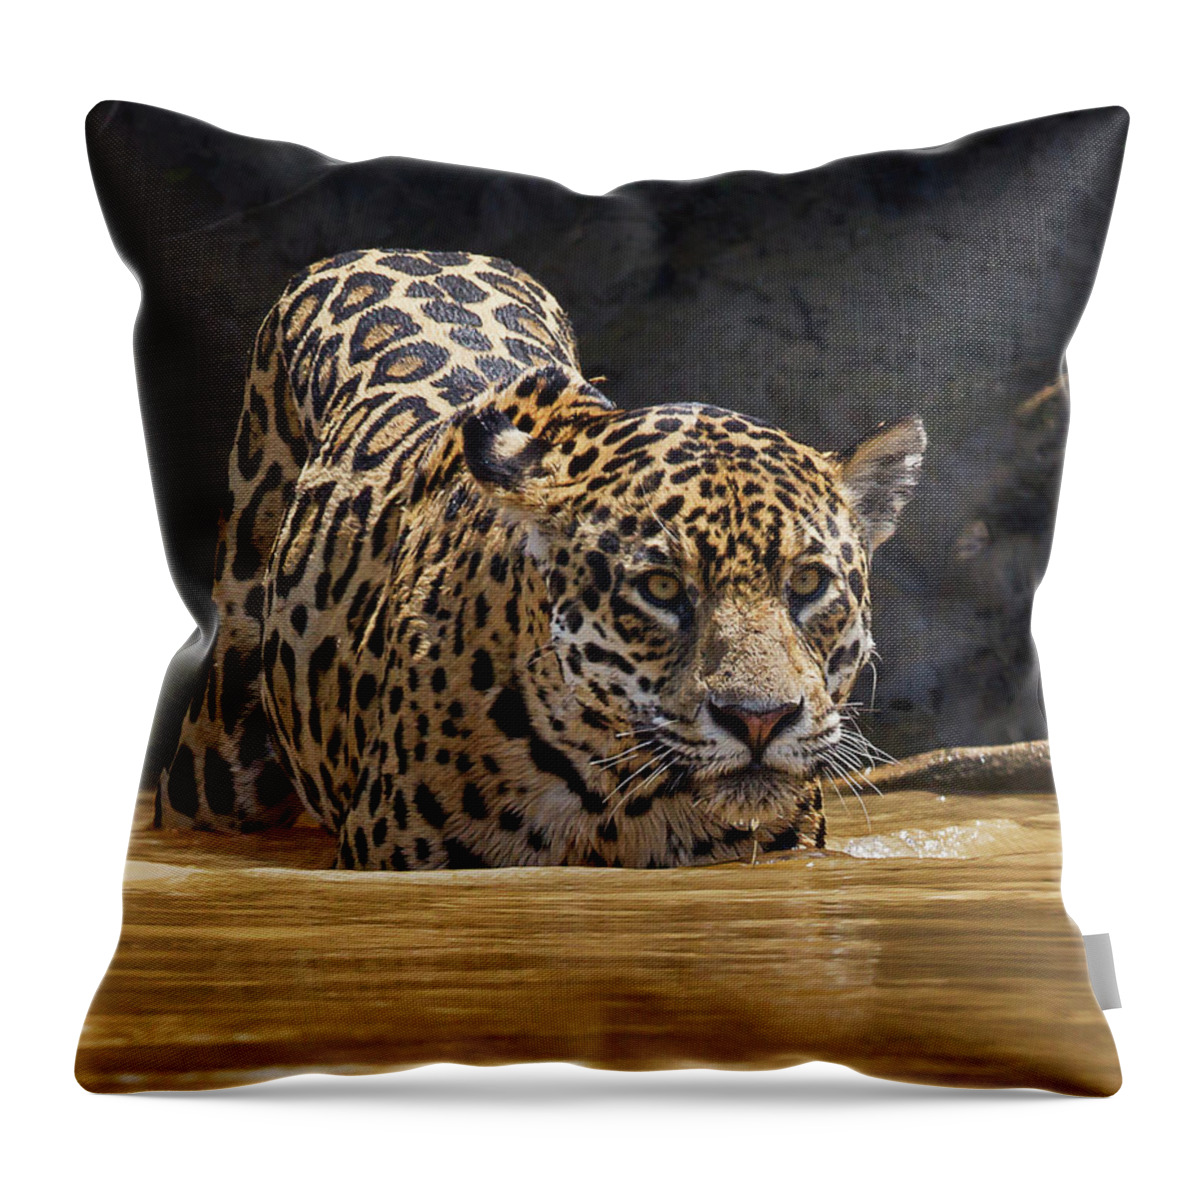 2016 Throw Pillow featuring the photograph Jaguar by Jean-Luc Baron